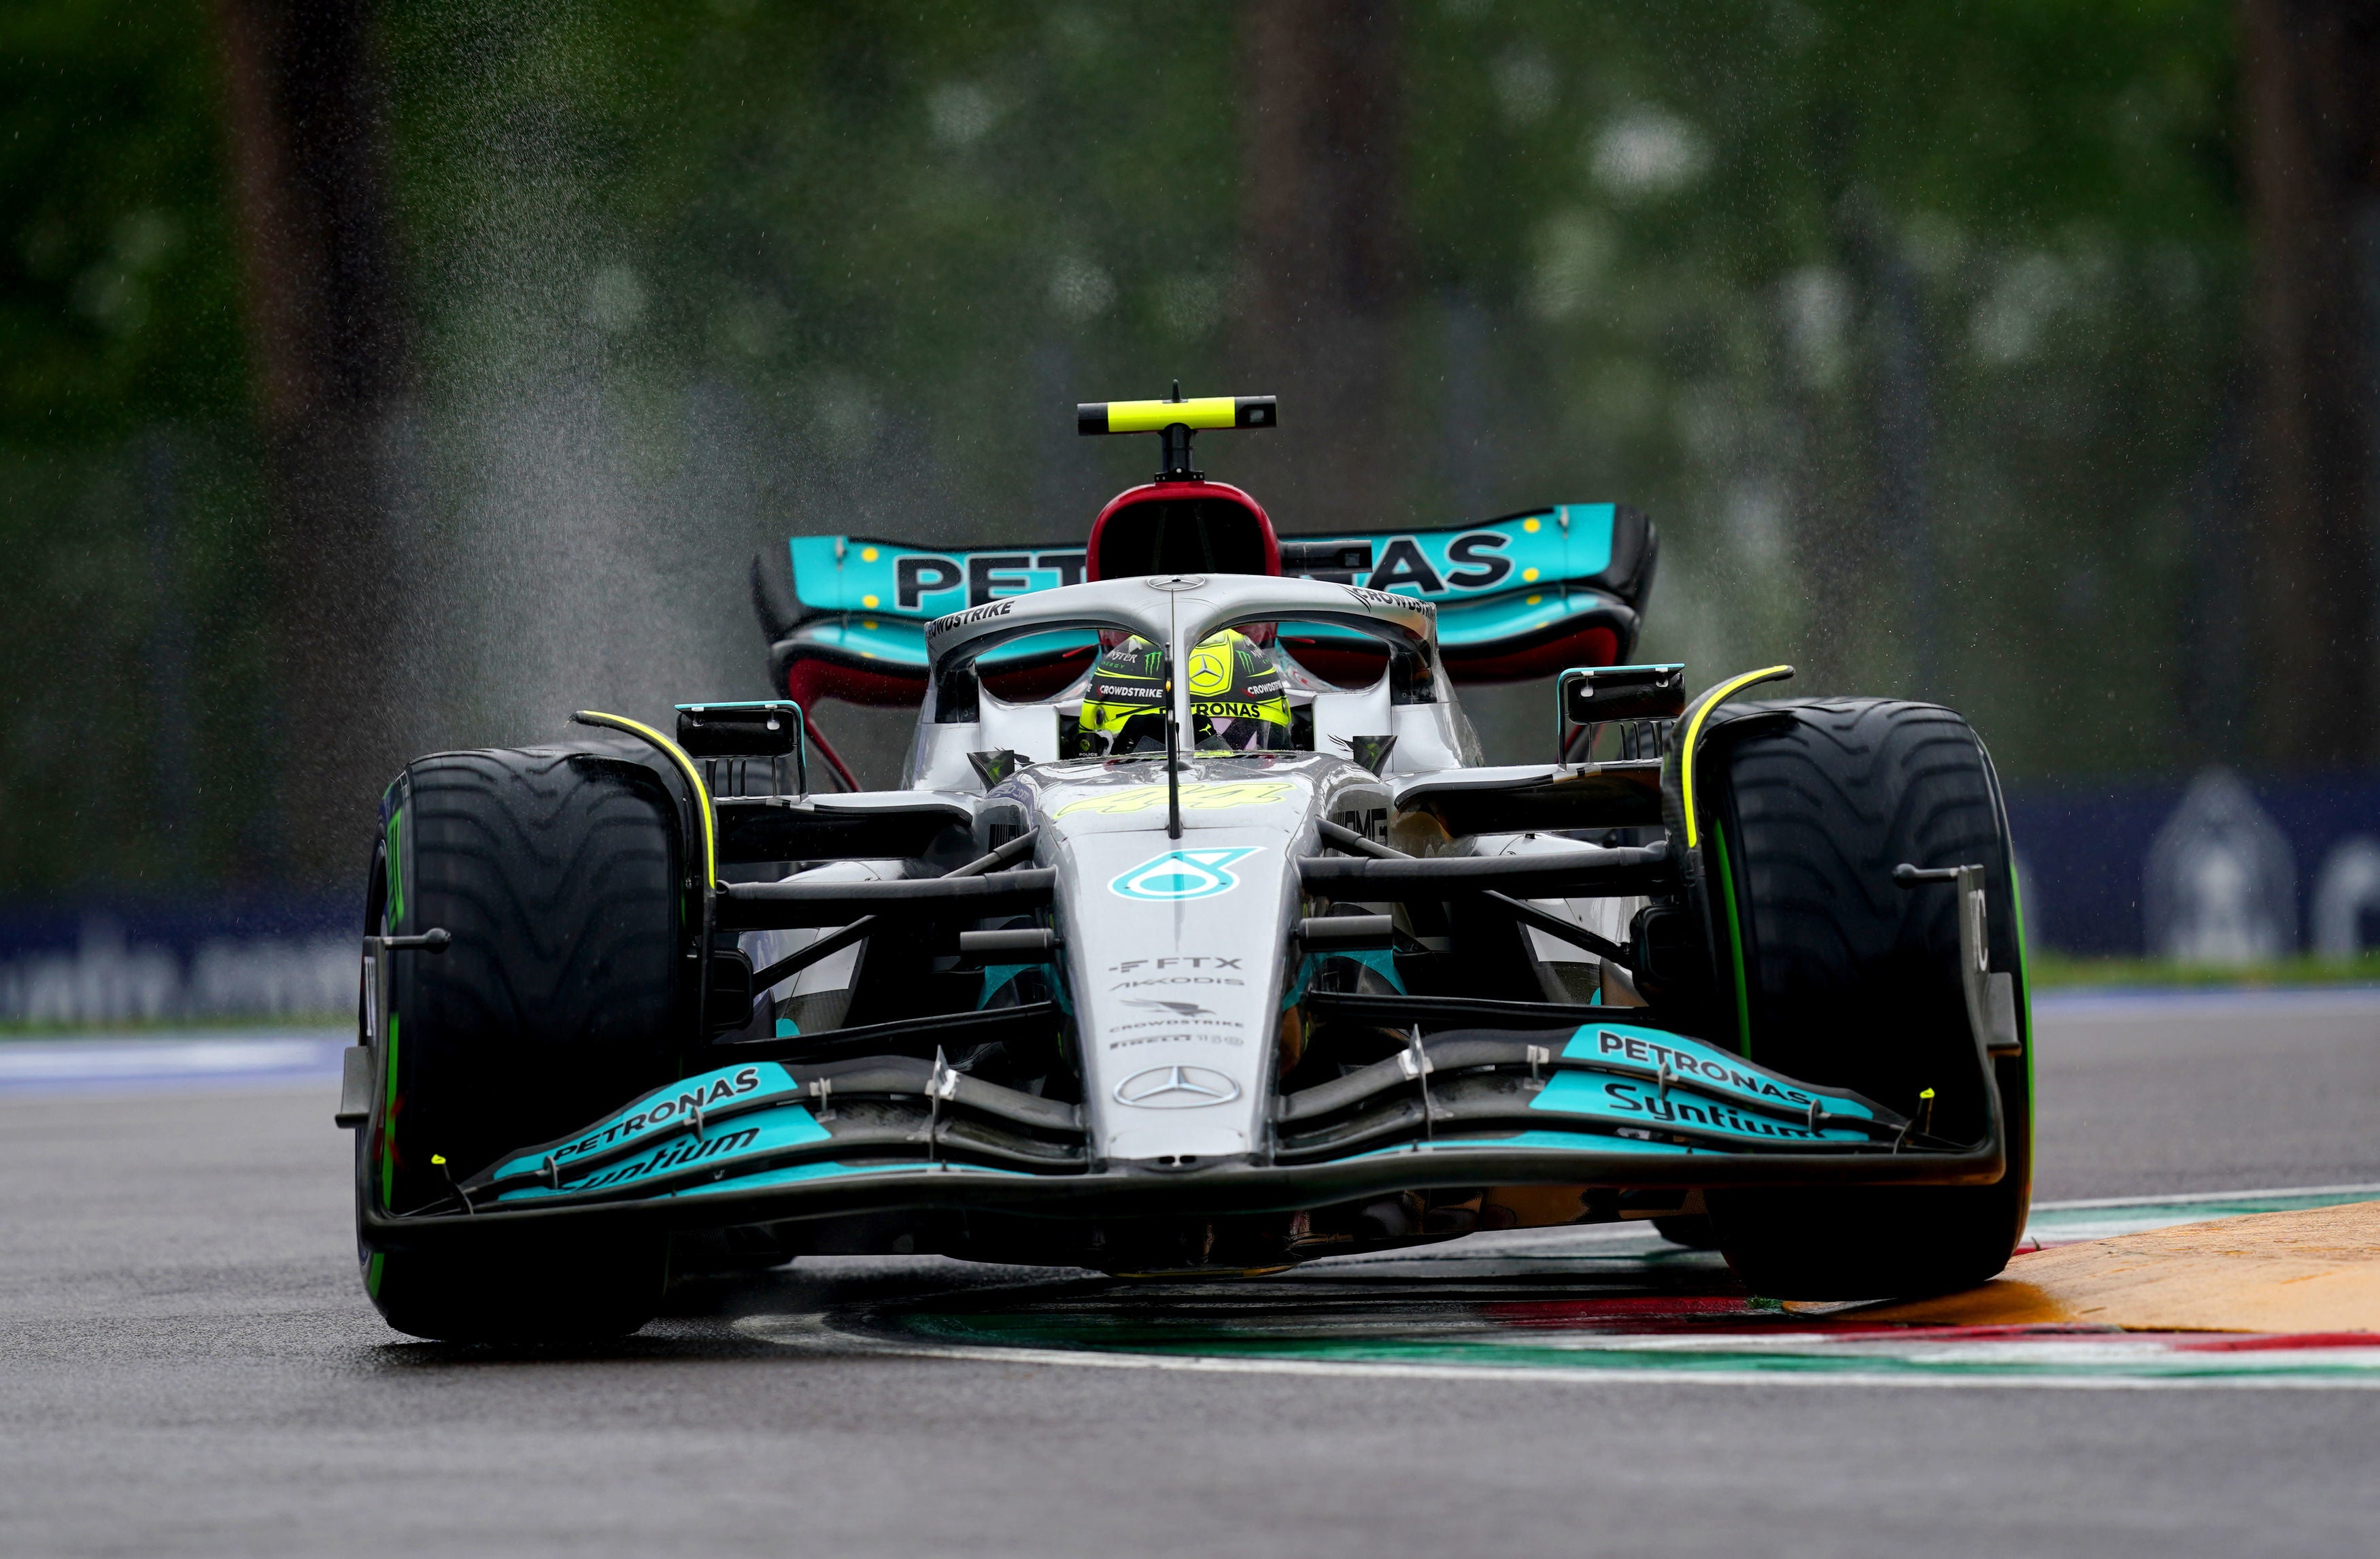 Lewis Hamilton voiced his frustration during qualifying